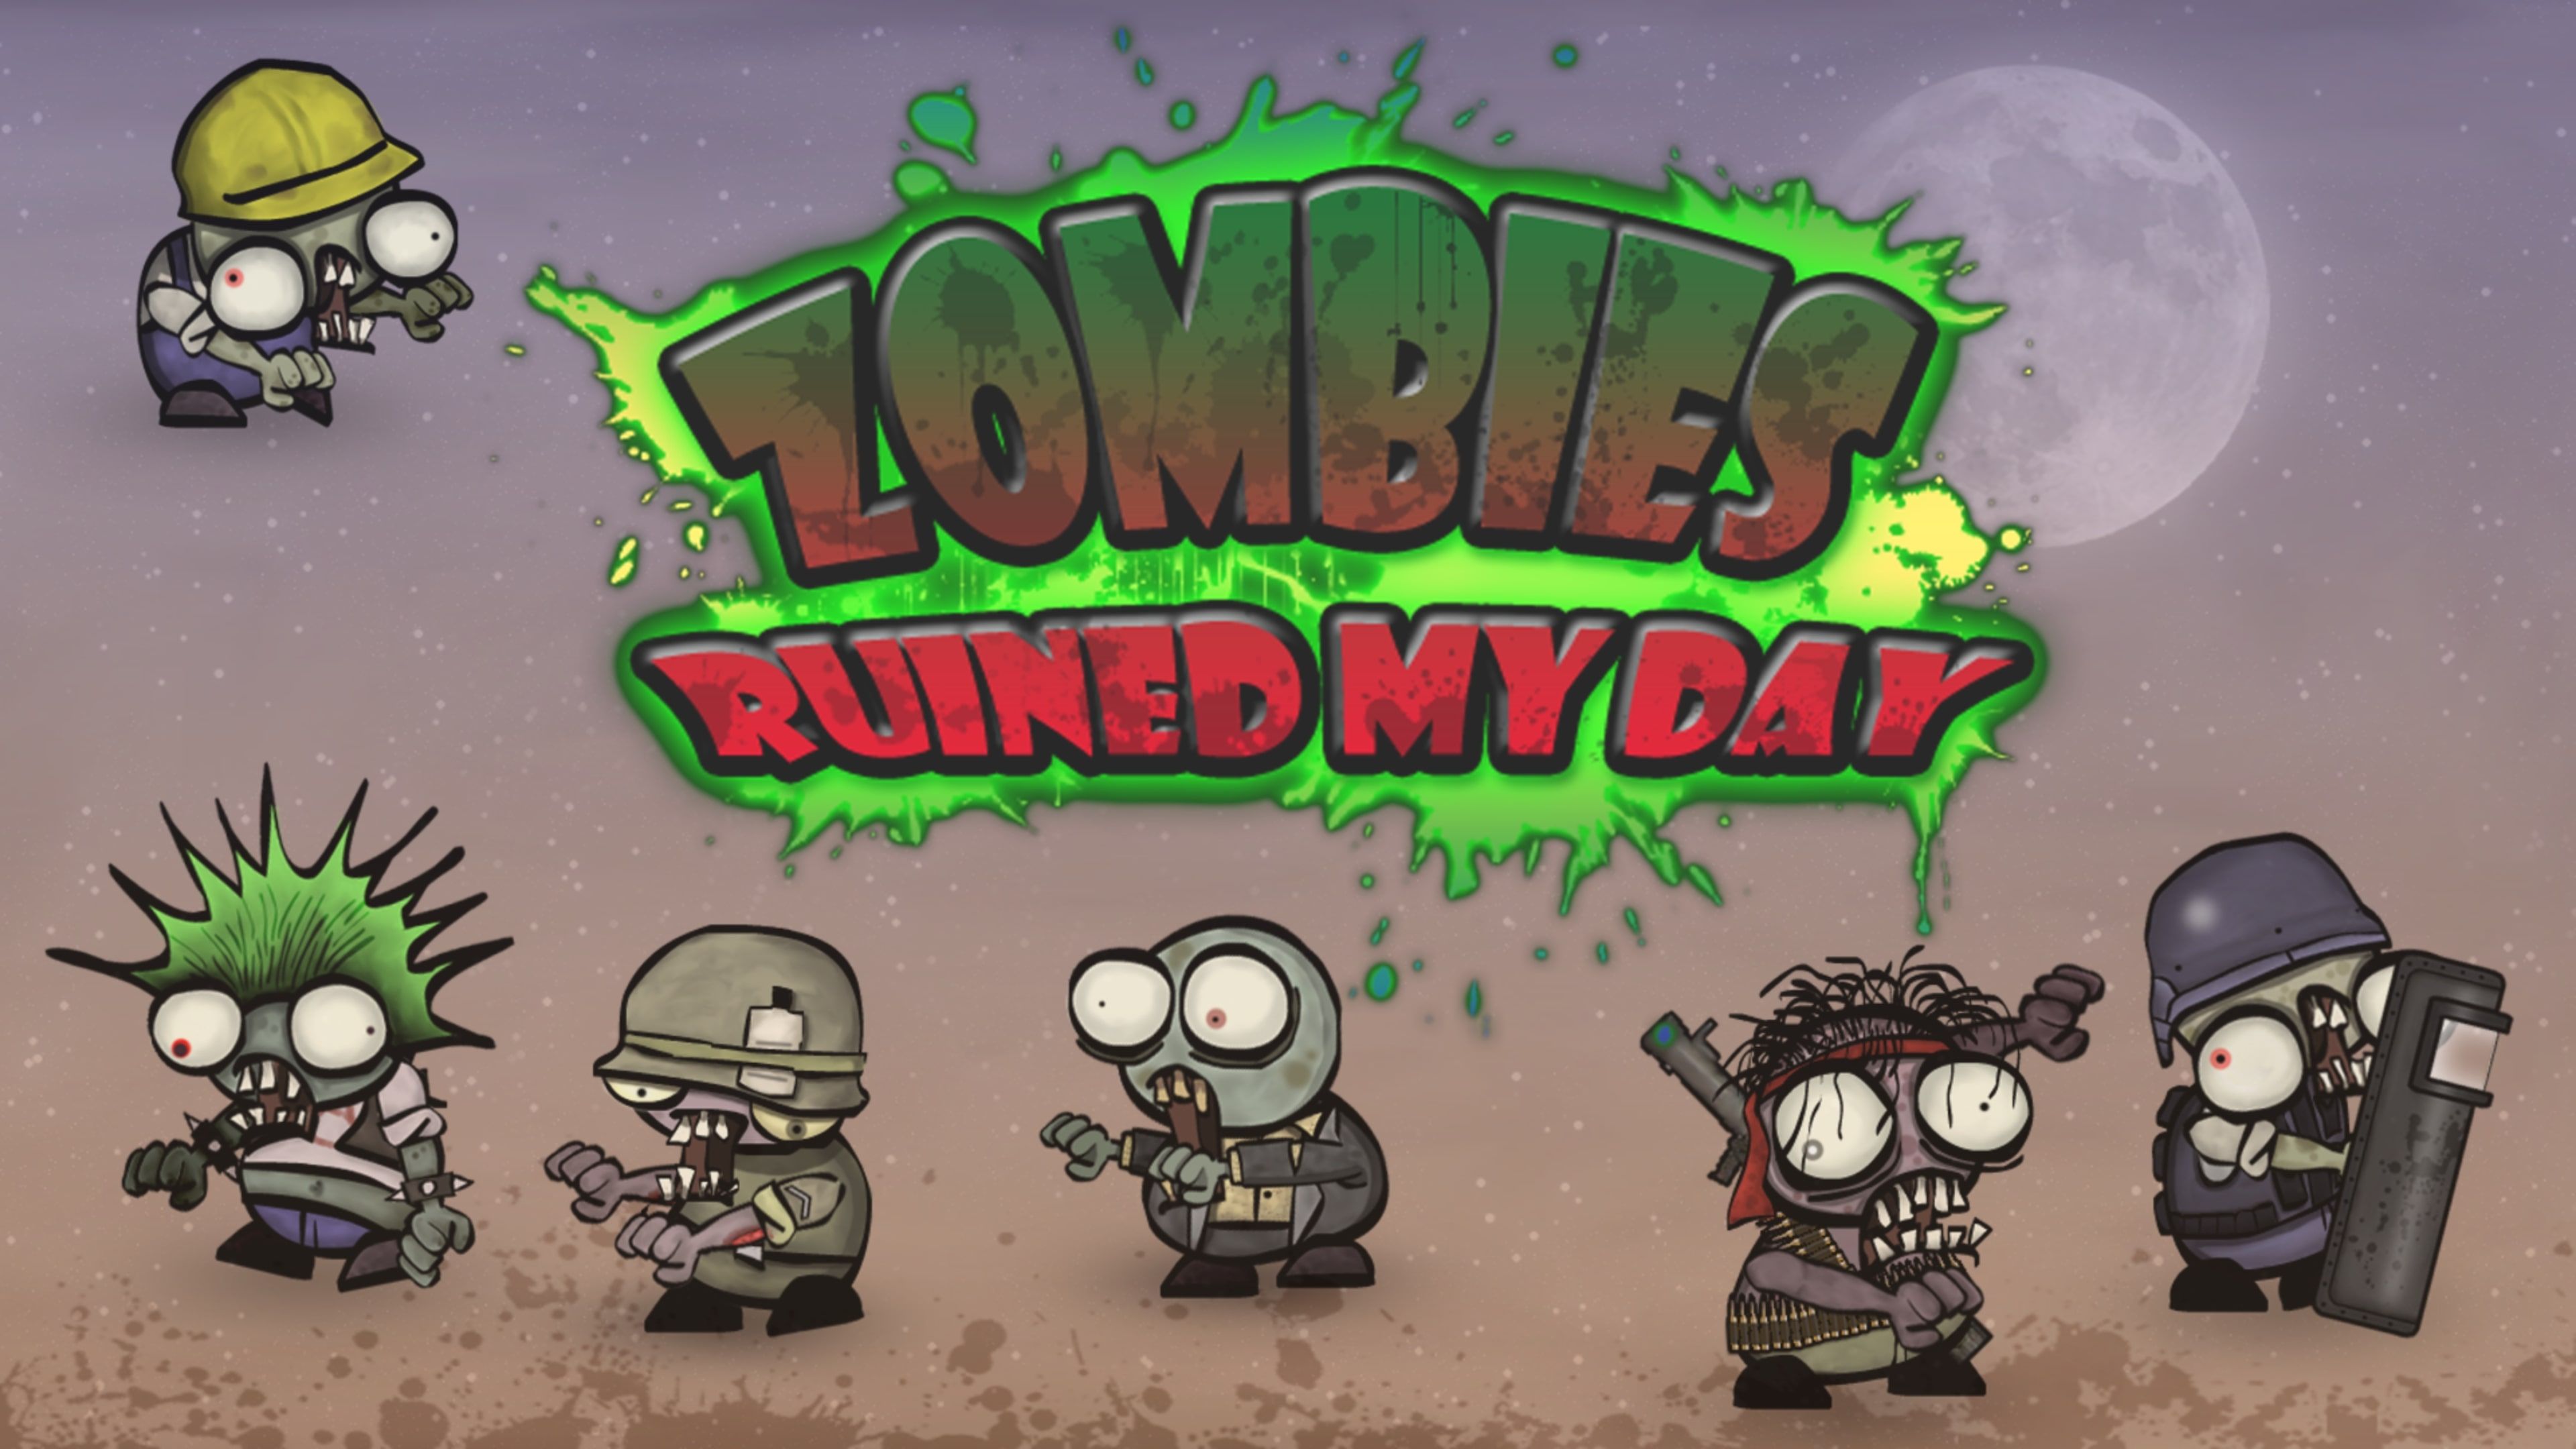 Zombies ruined my day cover image